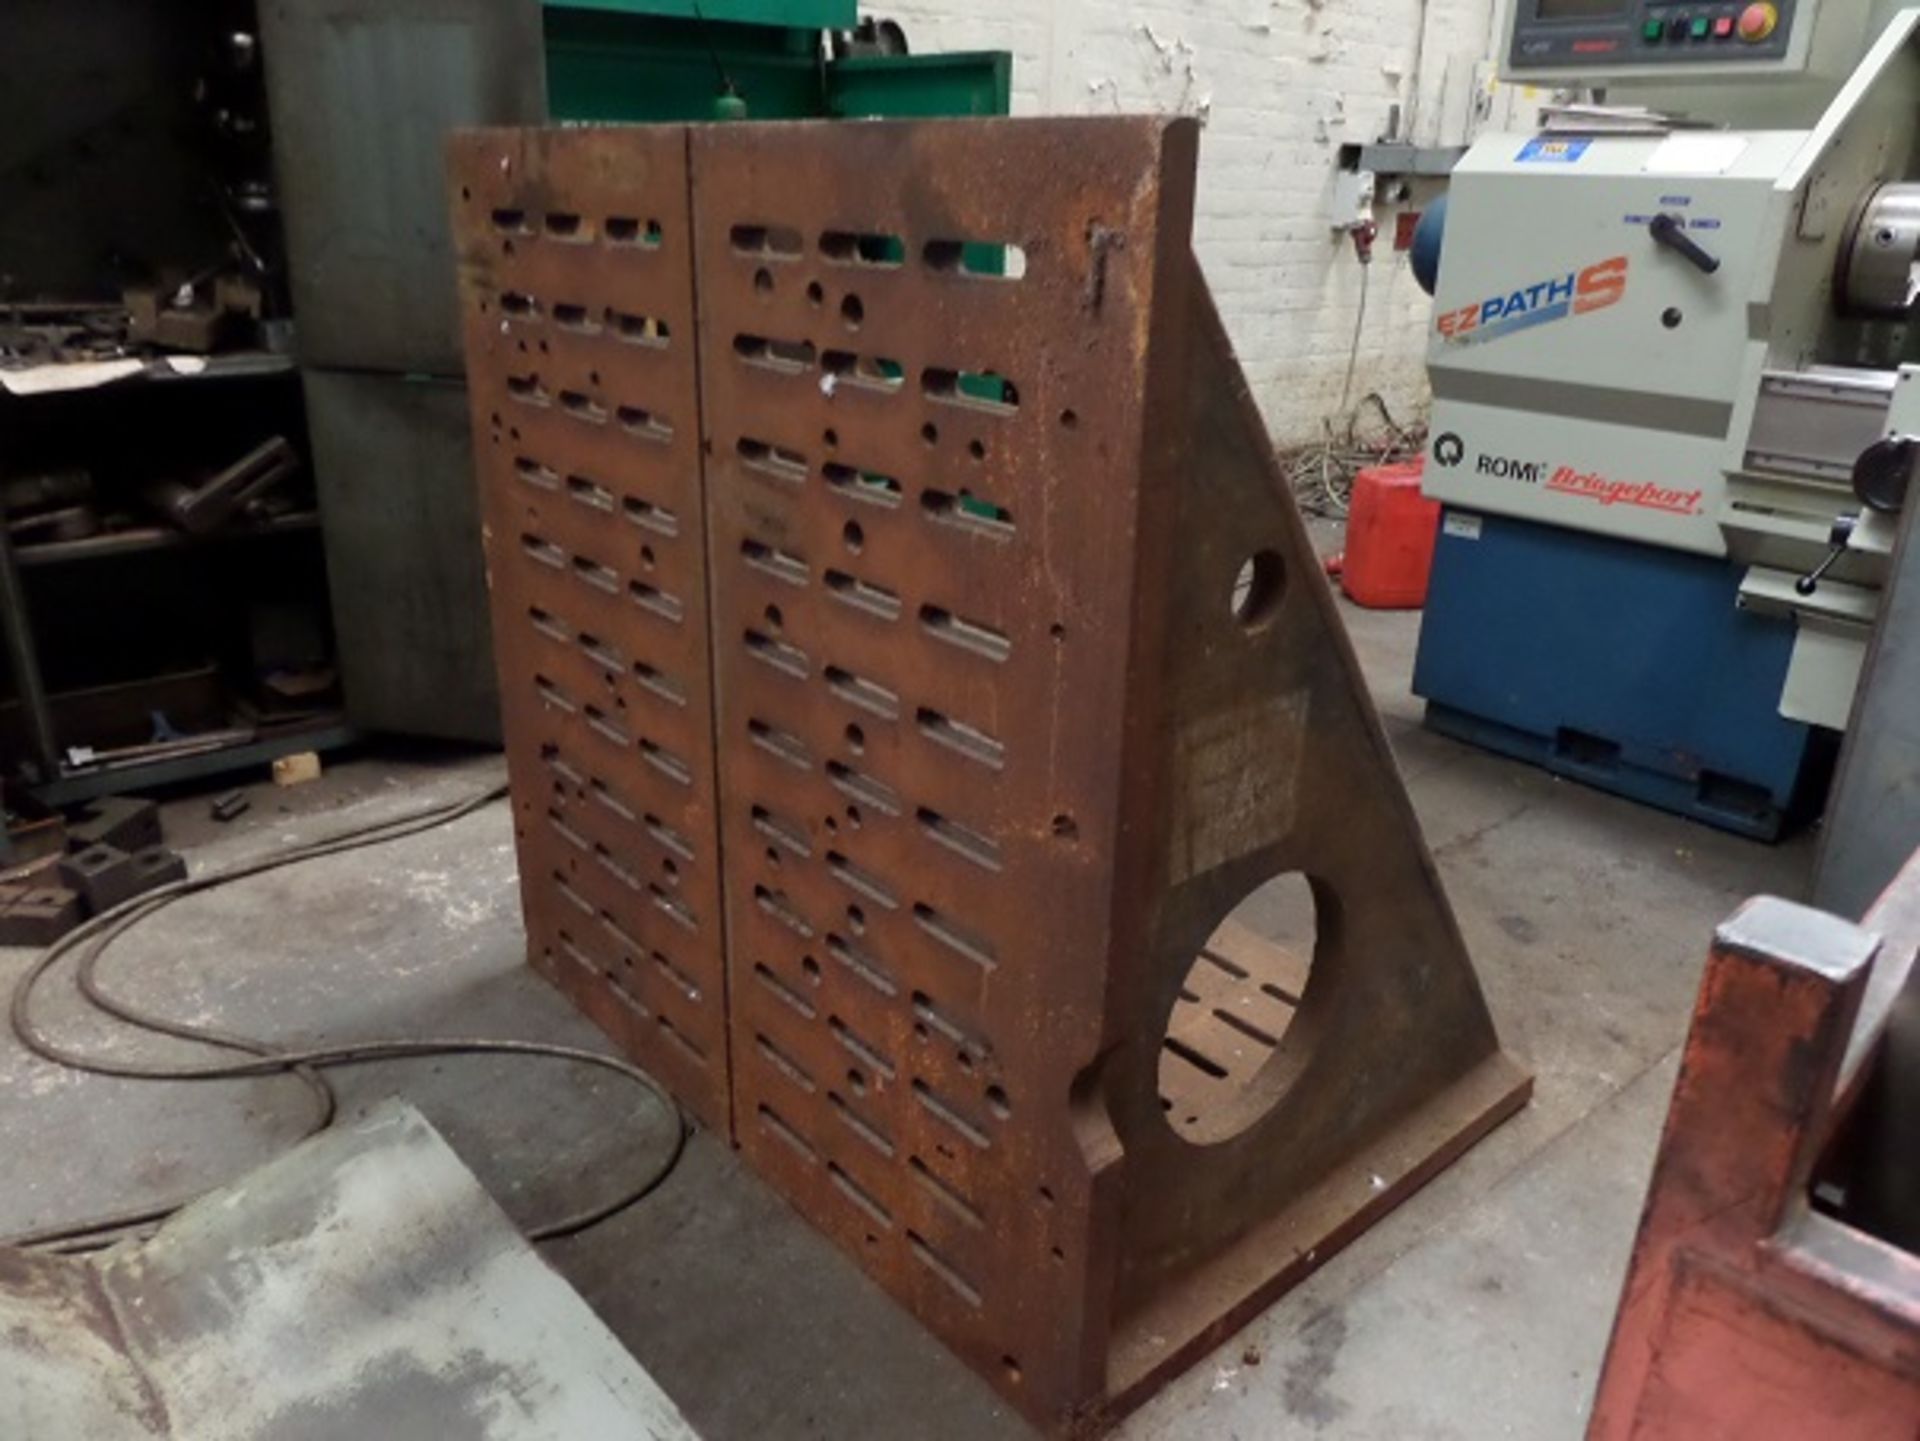 Slotted Angle Plate